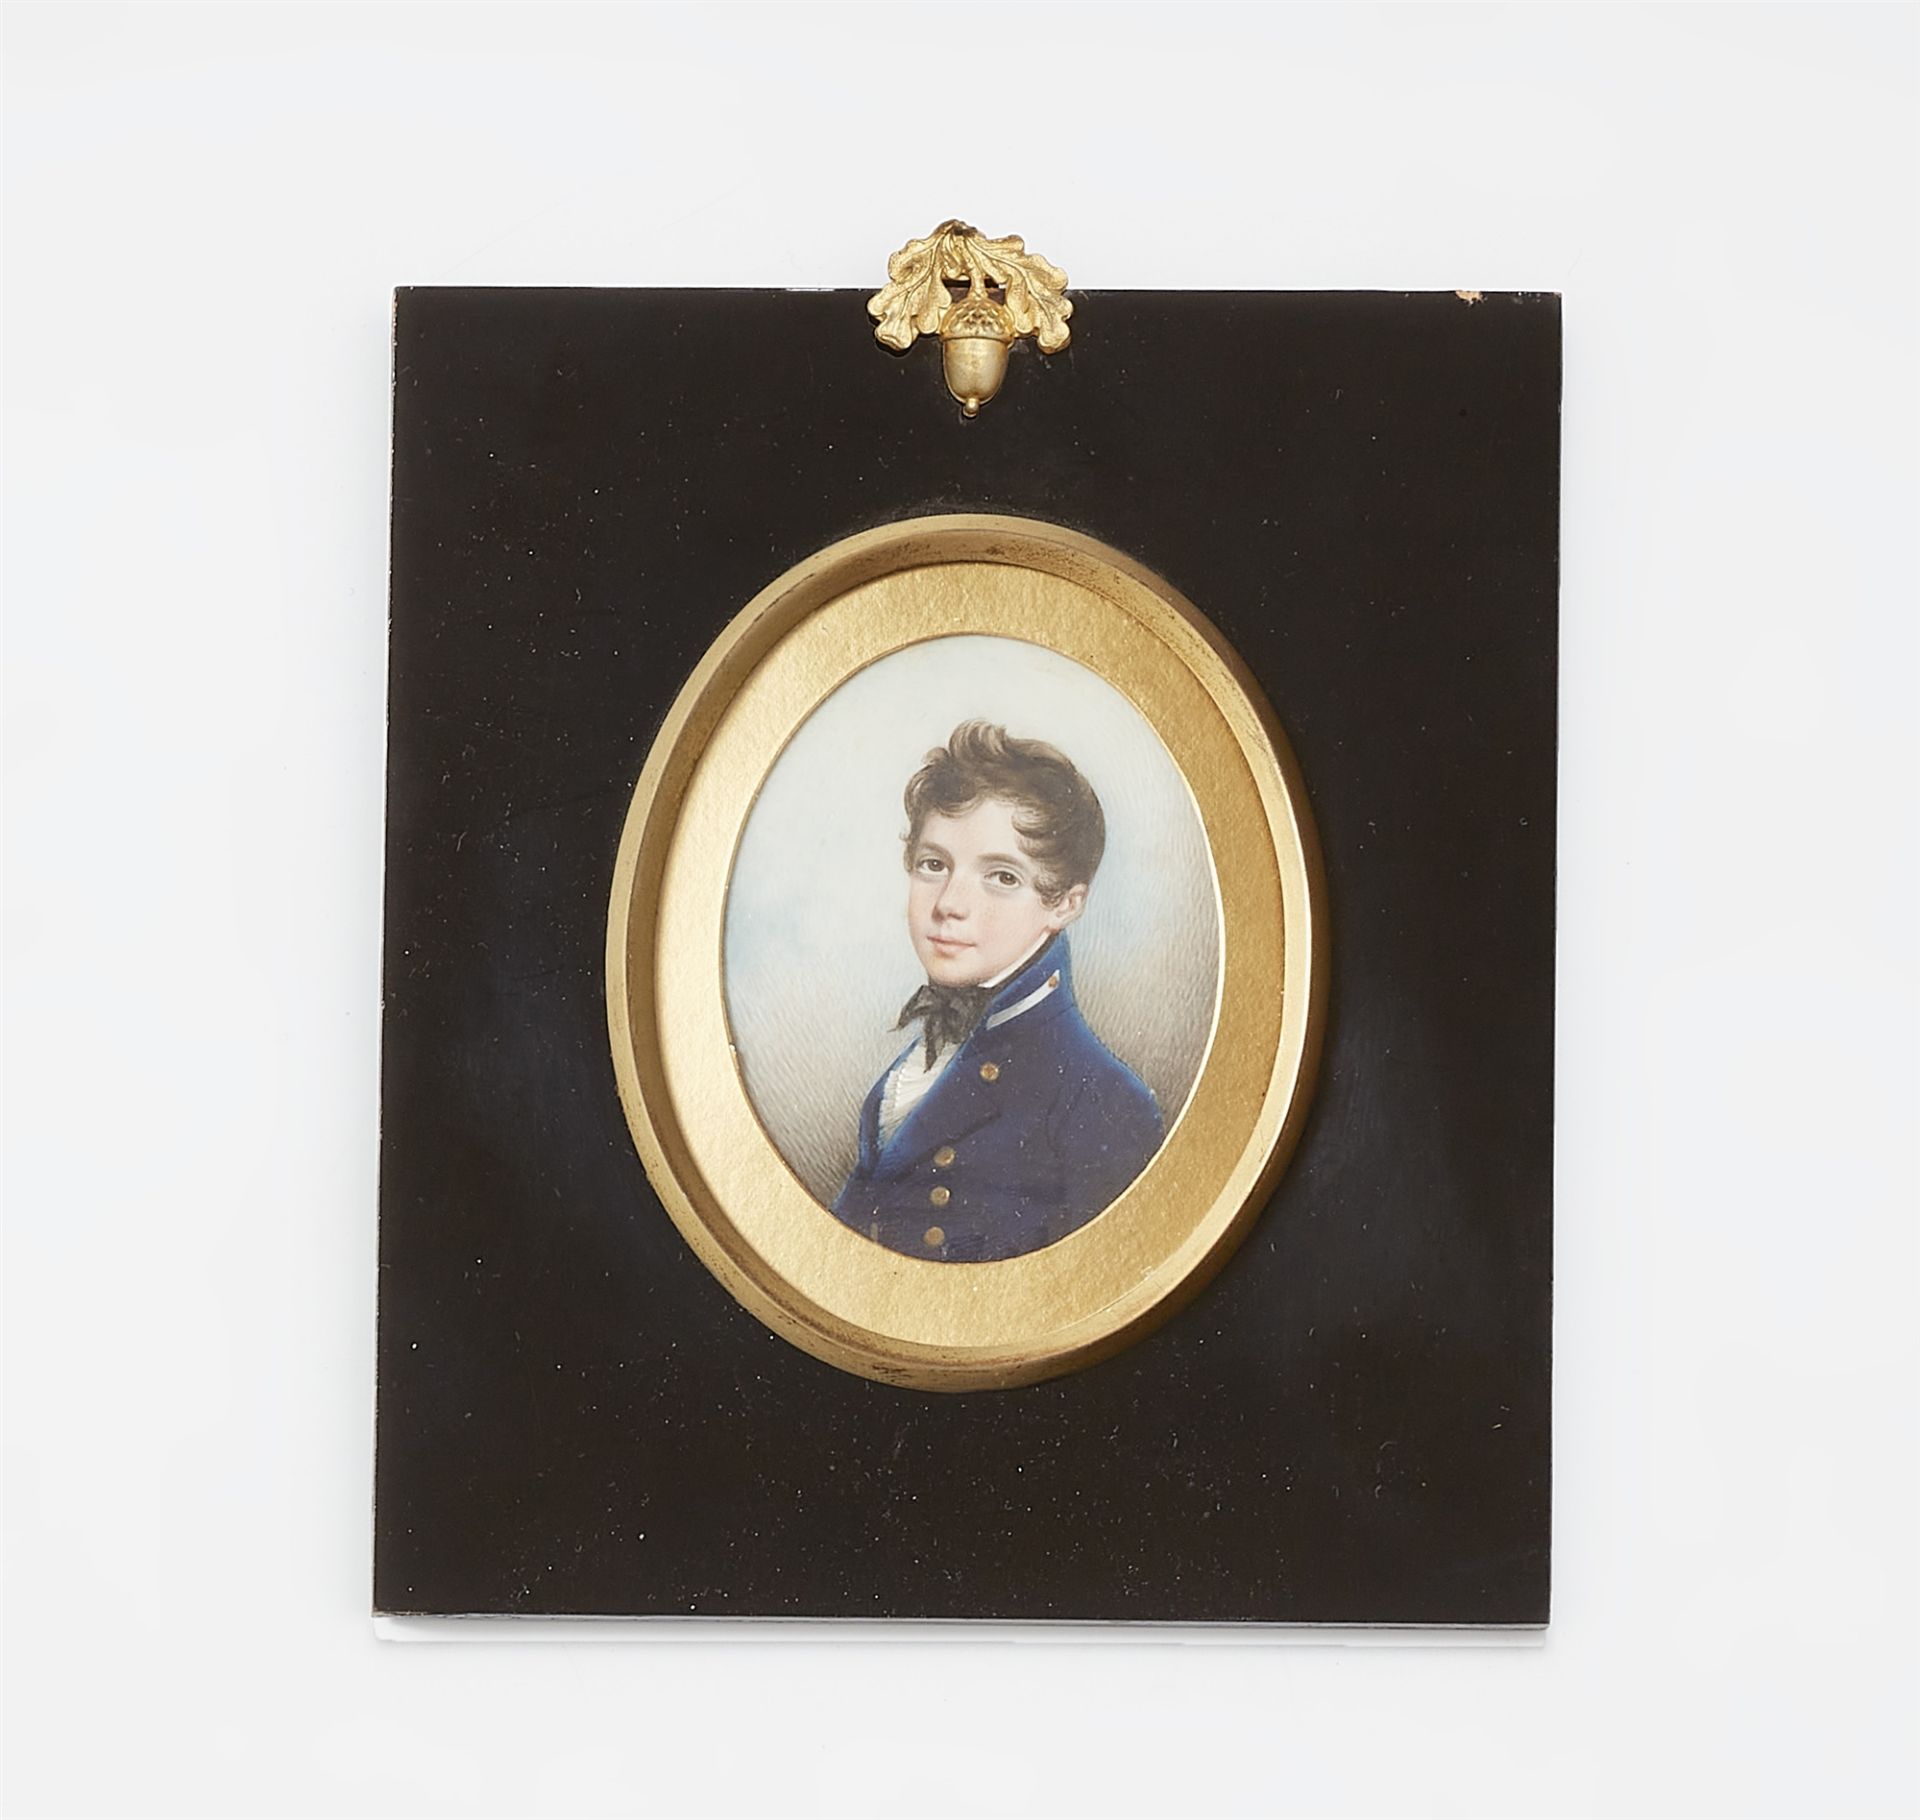 An English portrait miniature of a young navy cadet